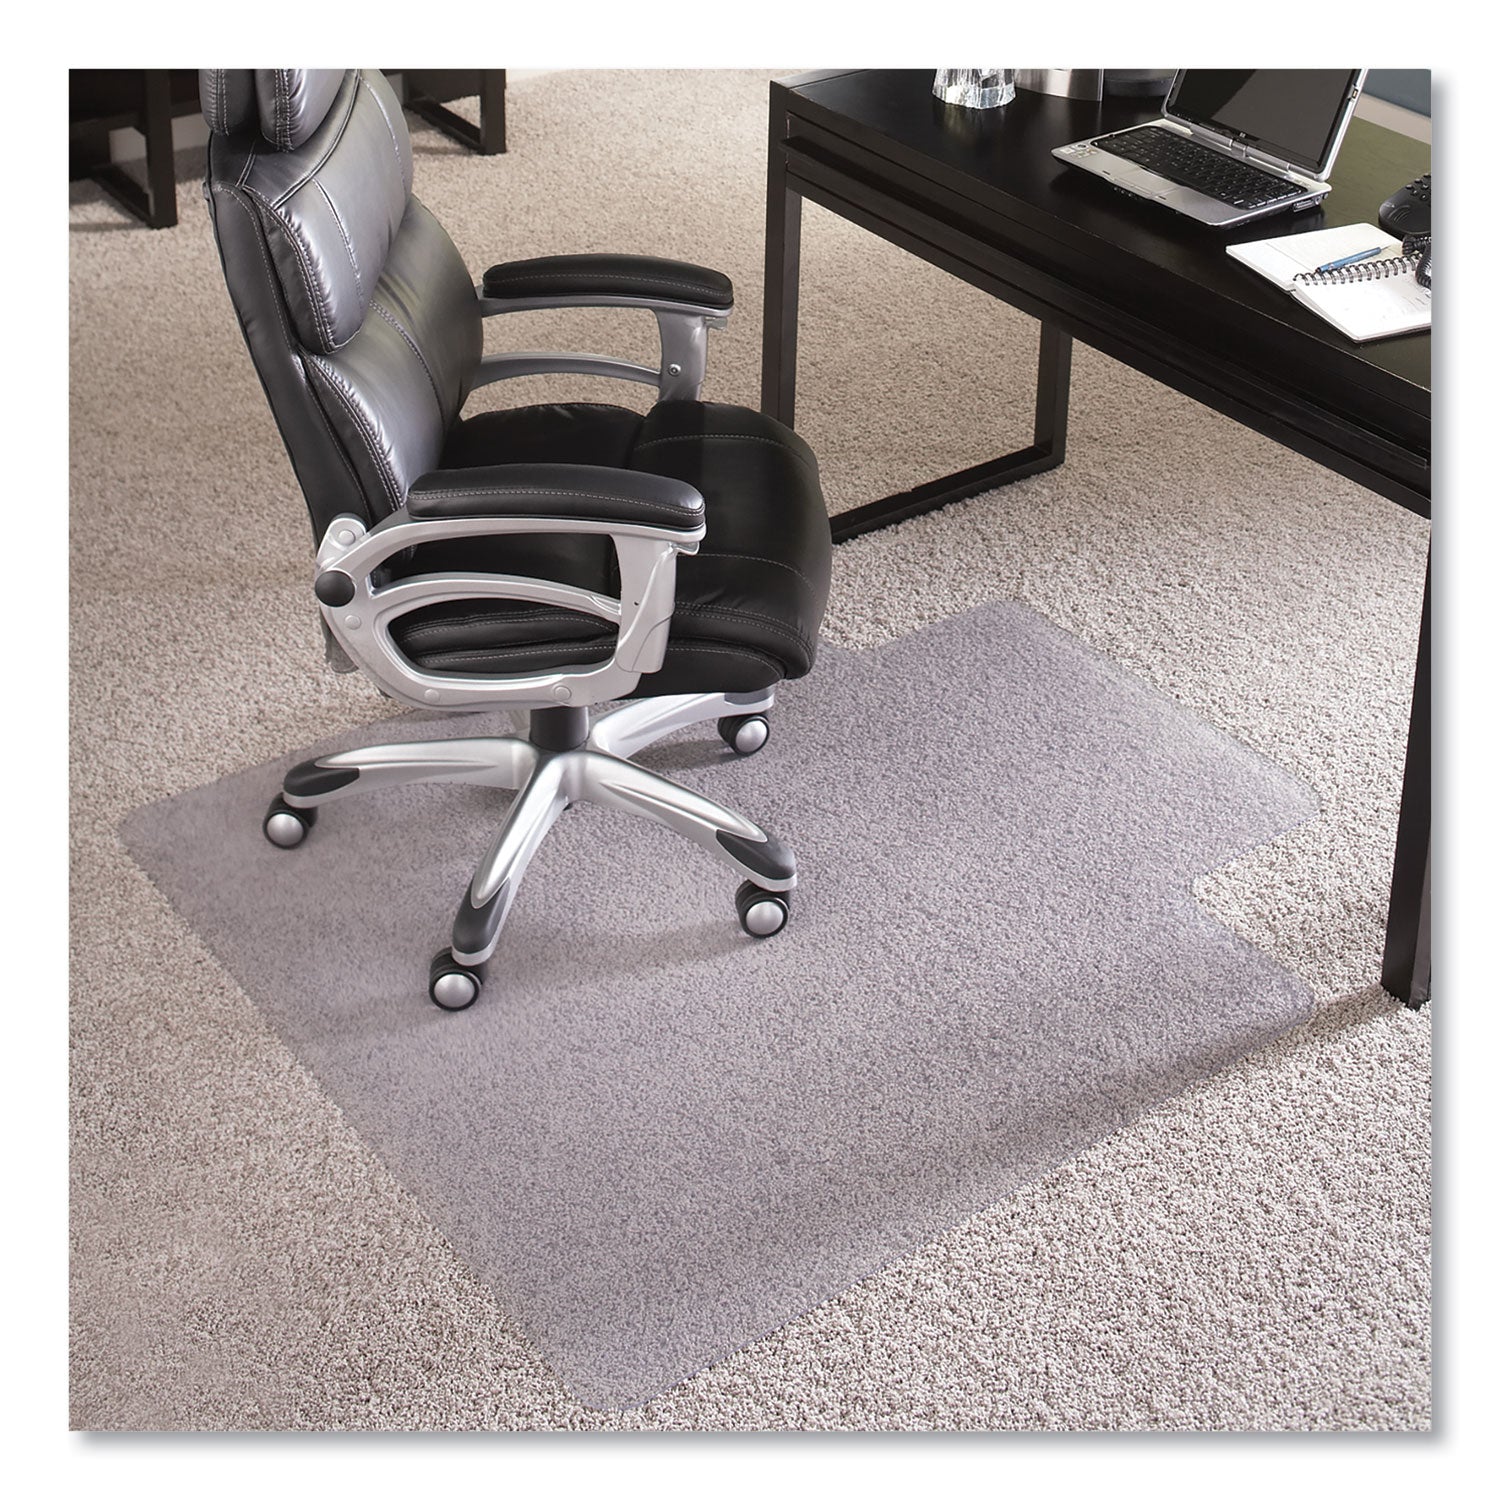 everlife-chair-mat-for-extra-high-pile-carpet-with-lip-46-x-60-clear-ships-in-4-6-business-days_esr124381 - 2